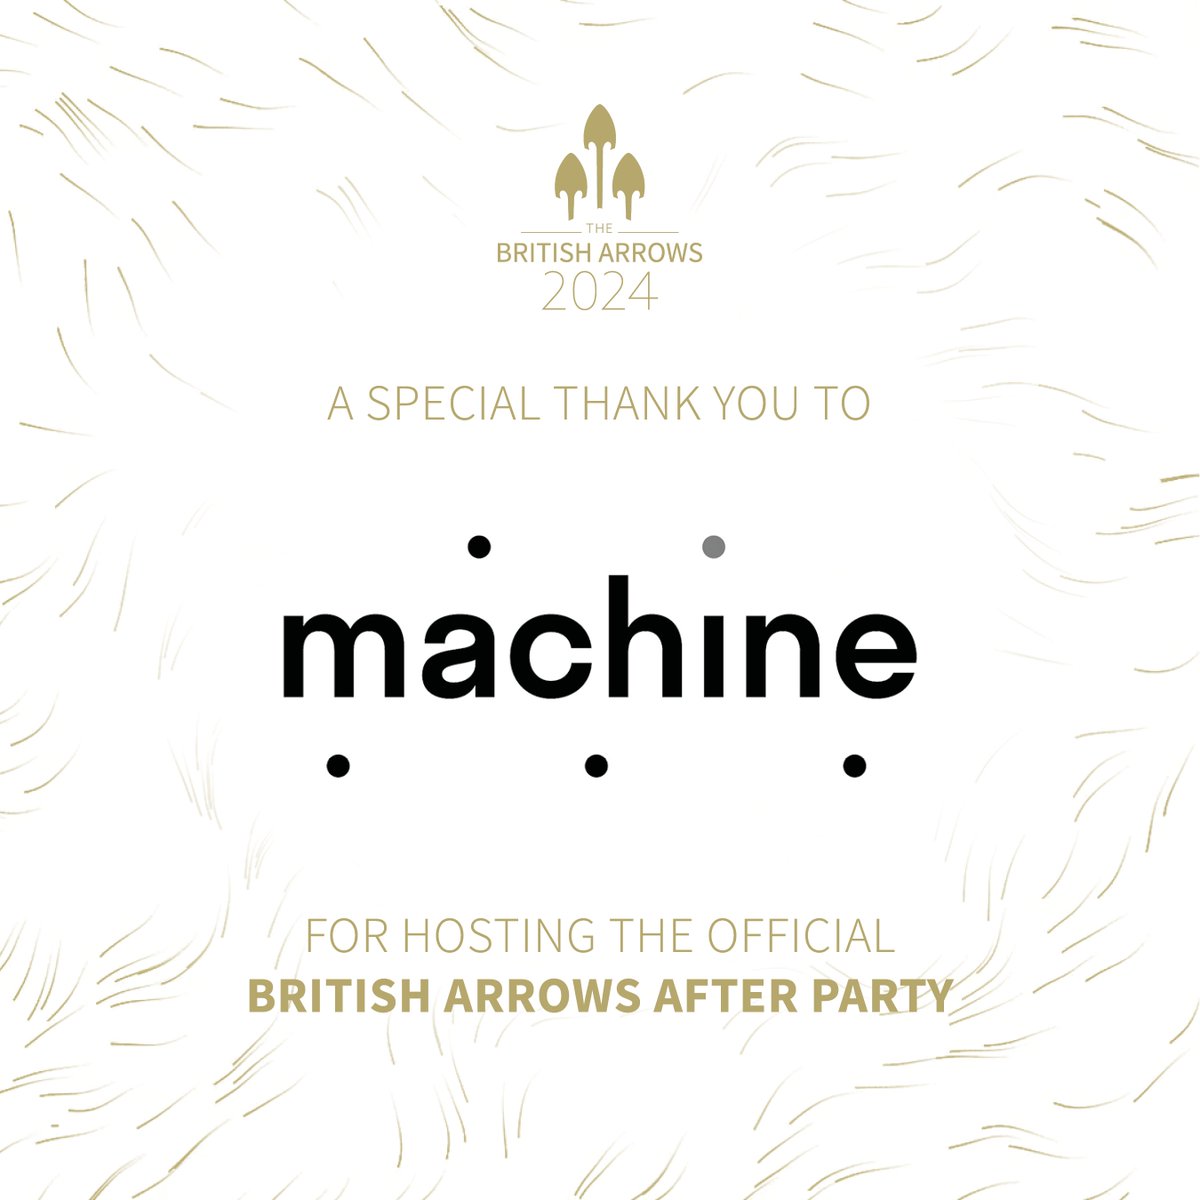 A special thank you to Machine For hosting the official British Arrows After Party! #BA23 #BA23 #BritishArrows #advertising #award #celebration